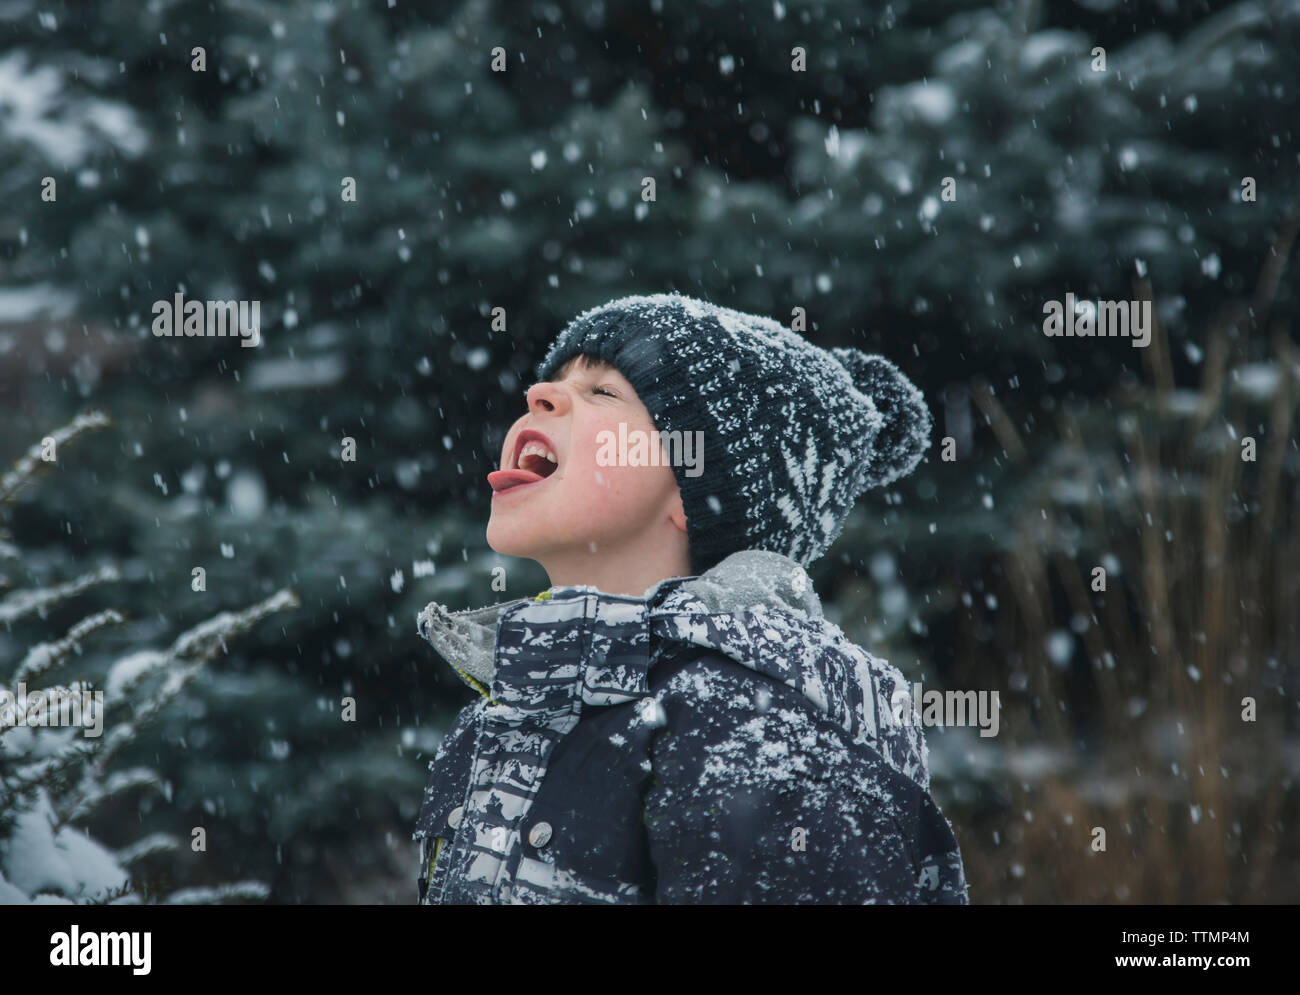 Playful boy sticking out tongue during snowfall Stock Photo